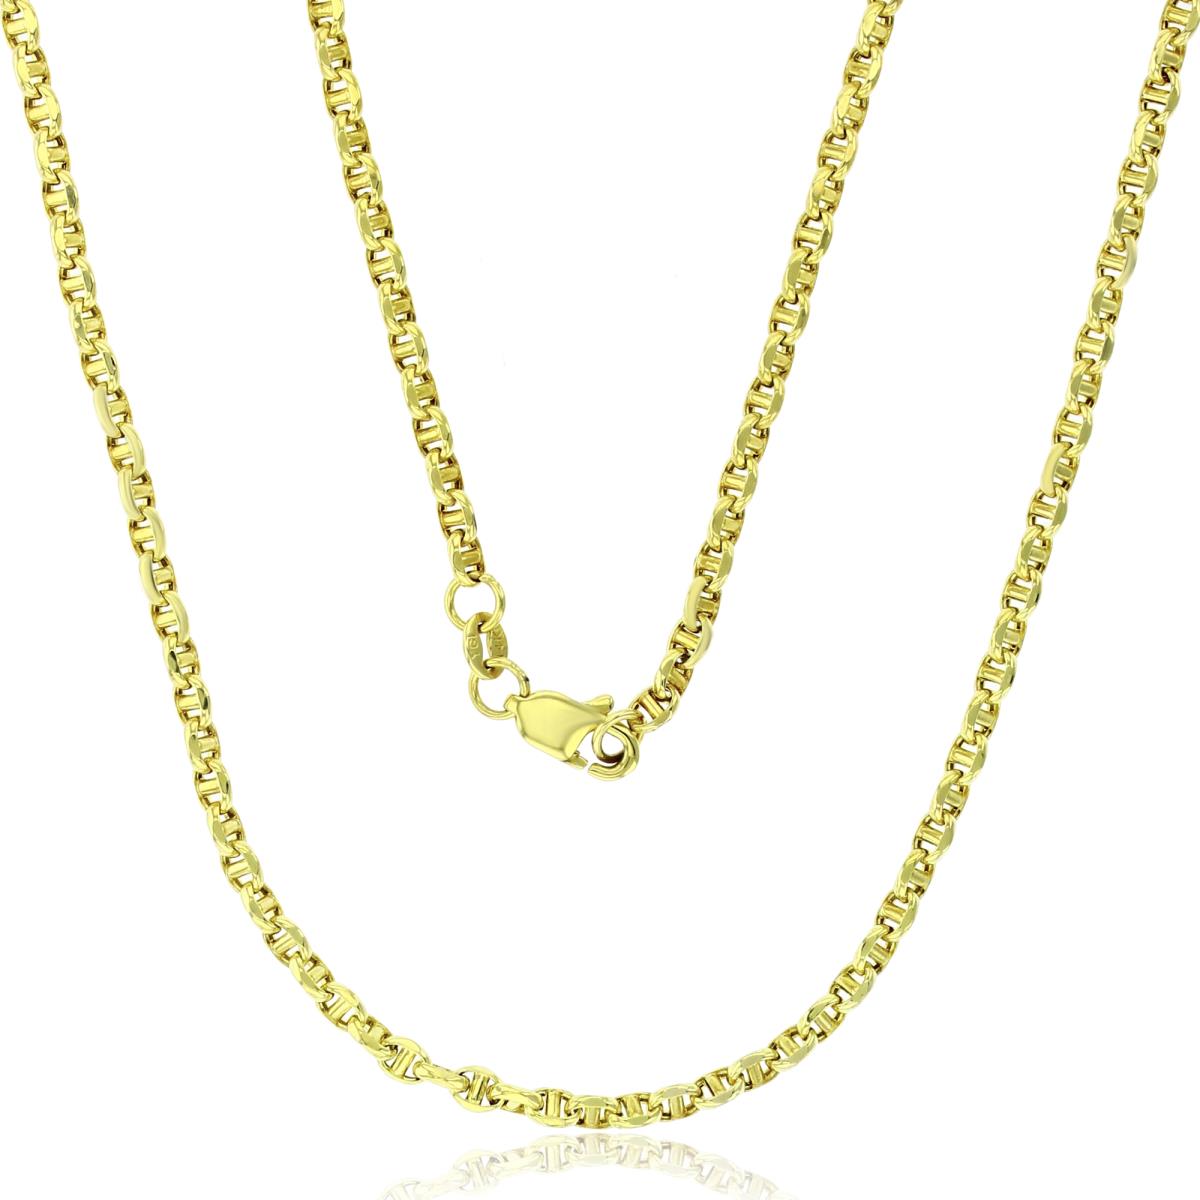 10K Yellow Gold Polished 3.00mm 16" Hollow Filk Chain